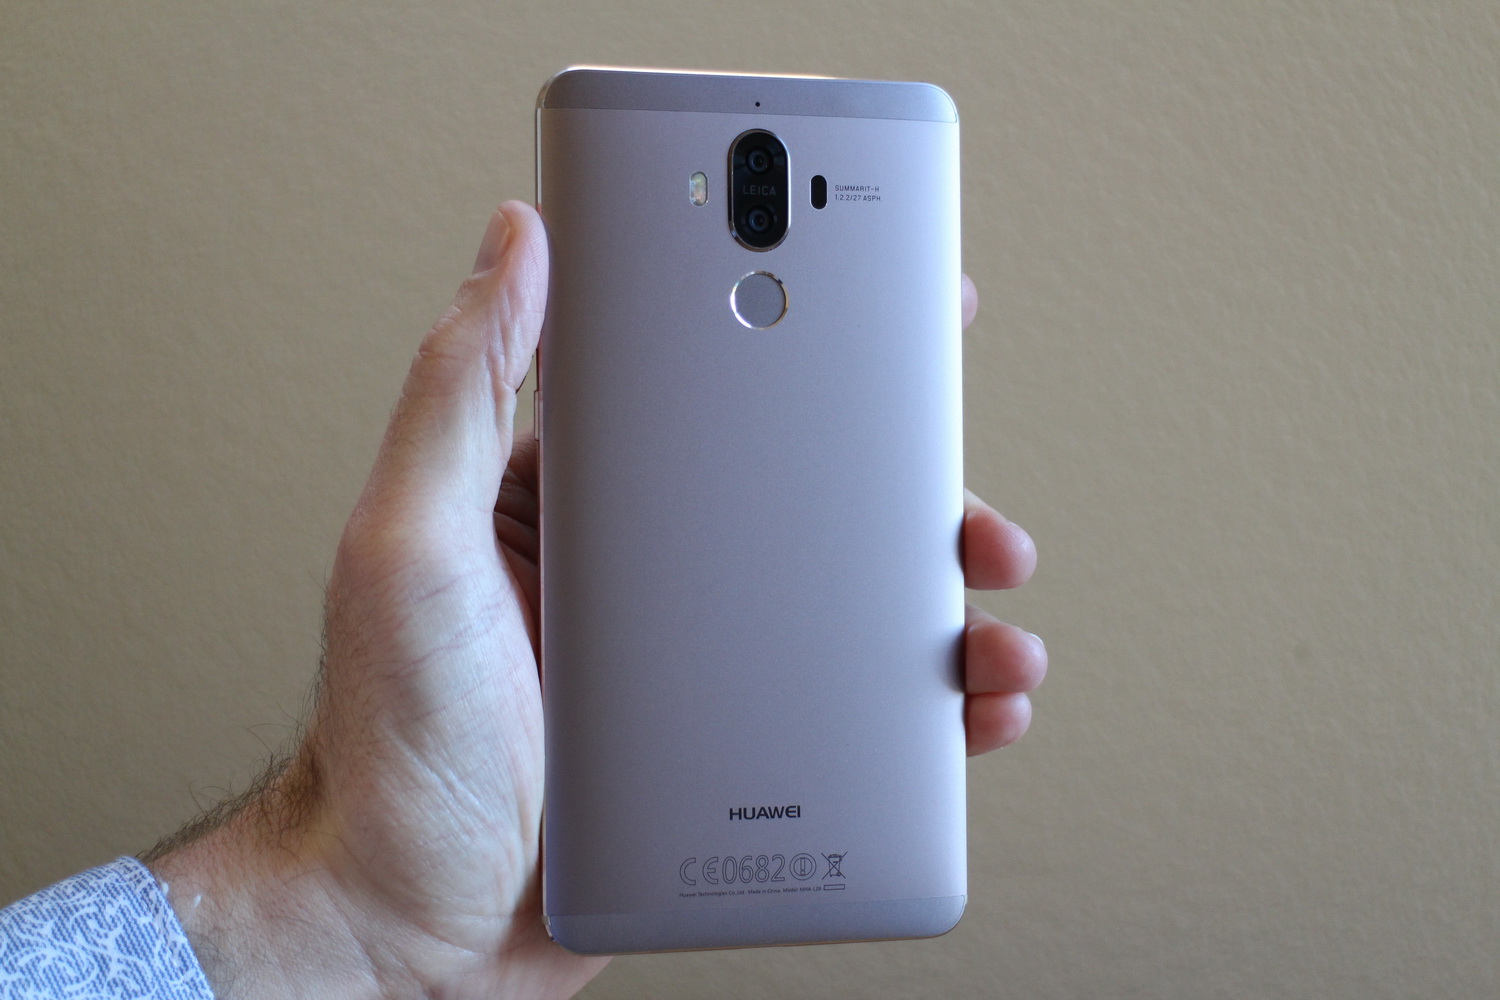 Luidruchtig taart Zwart Everything You Need To Know About The Huawei Mate 9 | Digital Trends